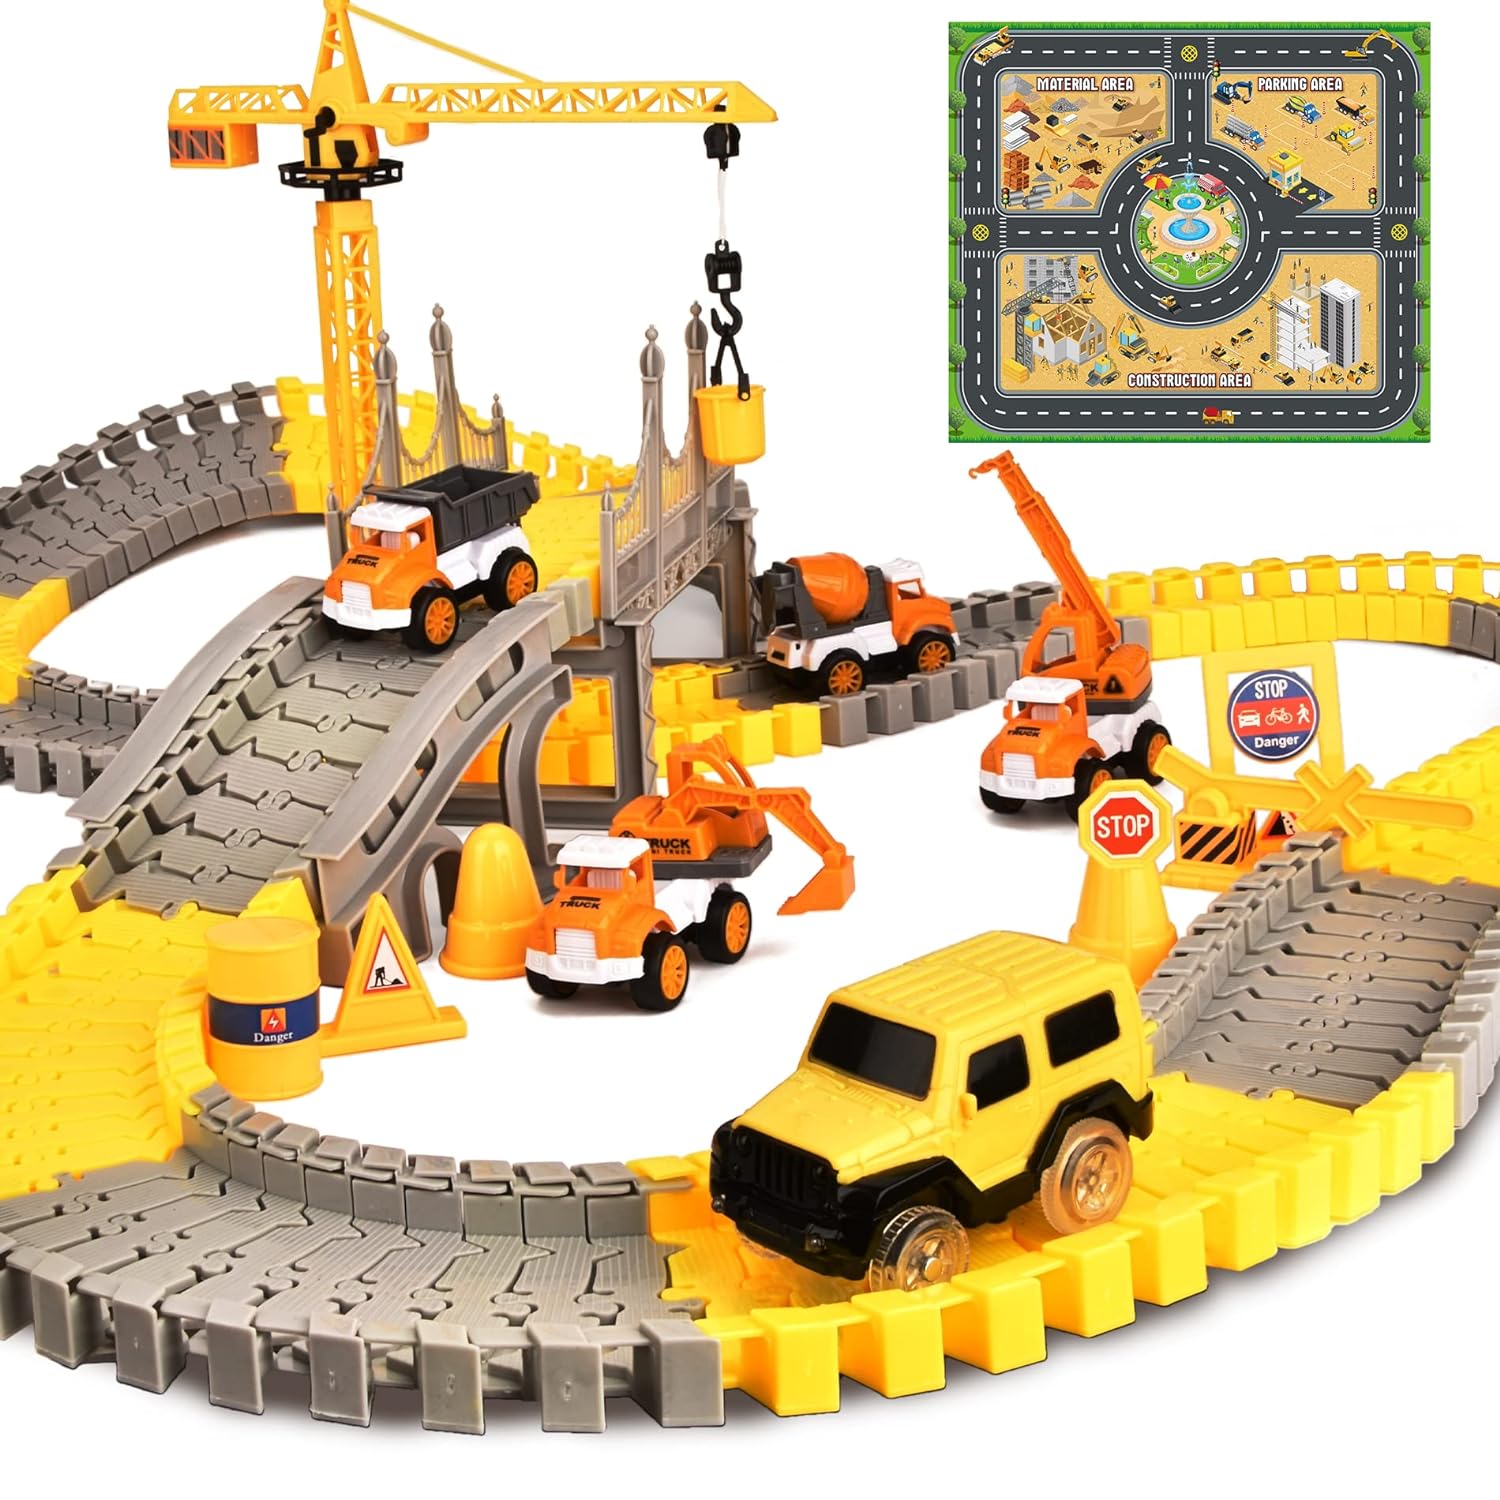 Great Choice Products Construction Race Tracks For Kids Toys For Boys,Slot Car Race Track Sets 5 Car Toys Trucks And Diy Track,Construction Ca…